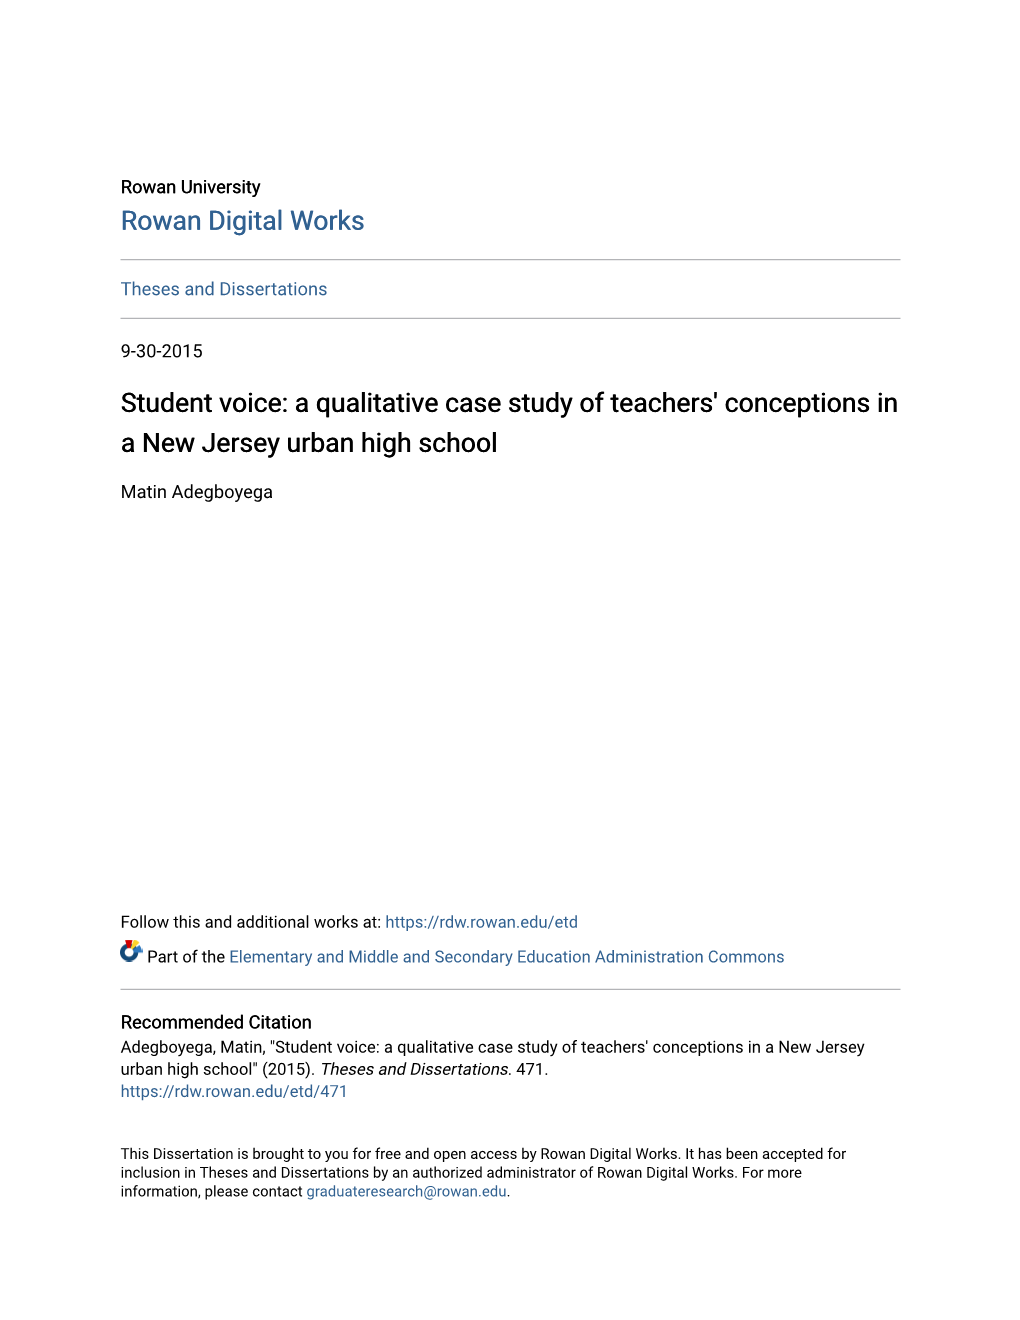 Student Voice: a Qualitative Case Study of Teachers' Conceptions in a New Jersey Urban High School